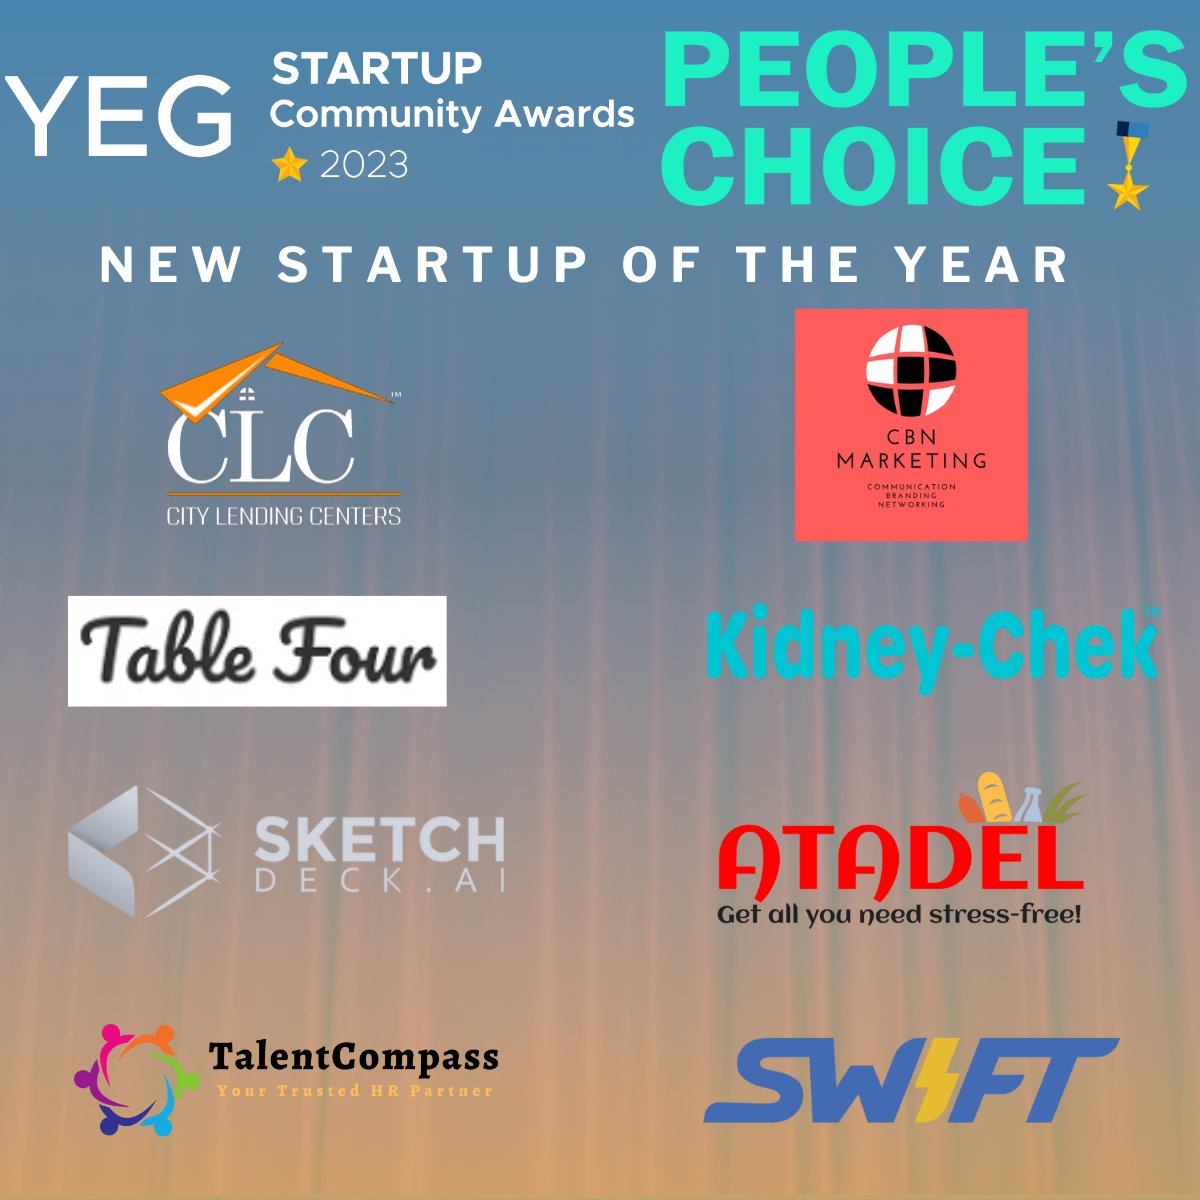 Did you know that for this year we have eight amazing startups for the People’s Choice New Startup of the Year Award?

Want to know more information about these startups? Check out our website!

yegstartupawards.ca/vote

#yegtech #yegstartup